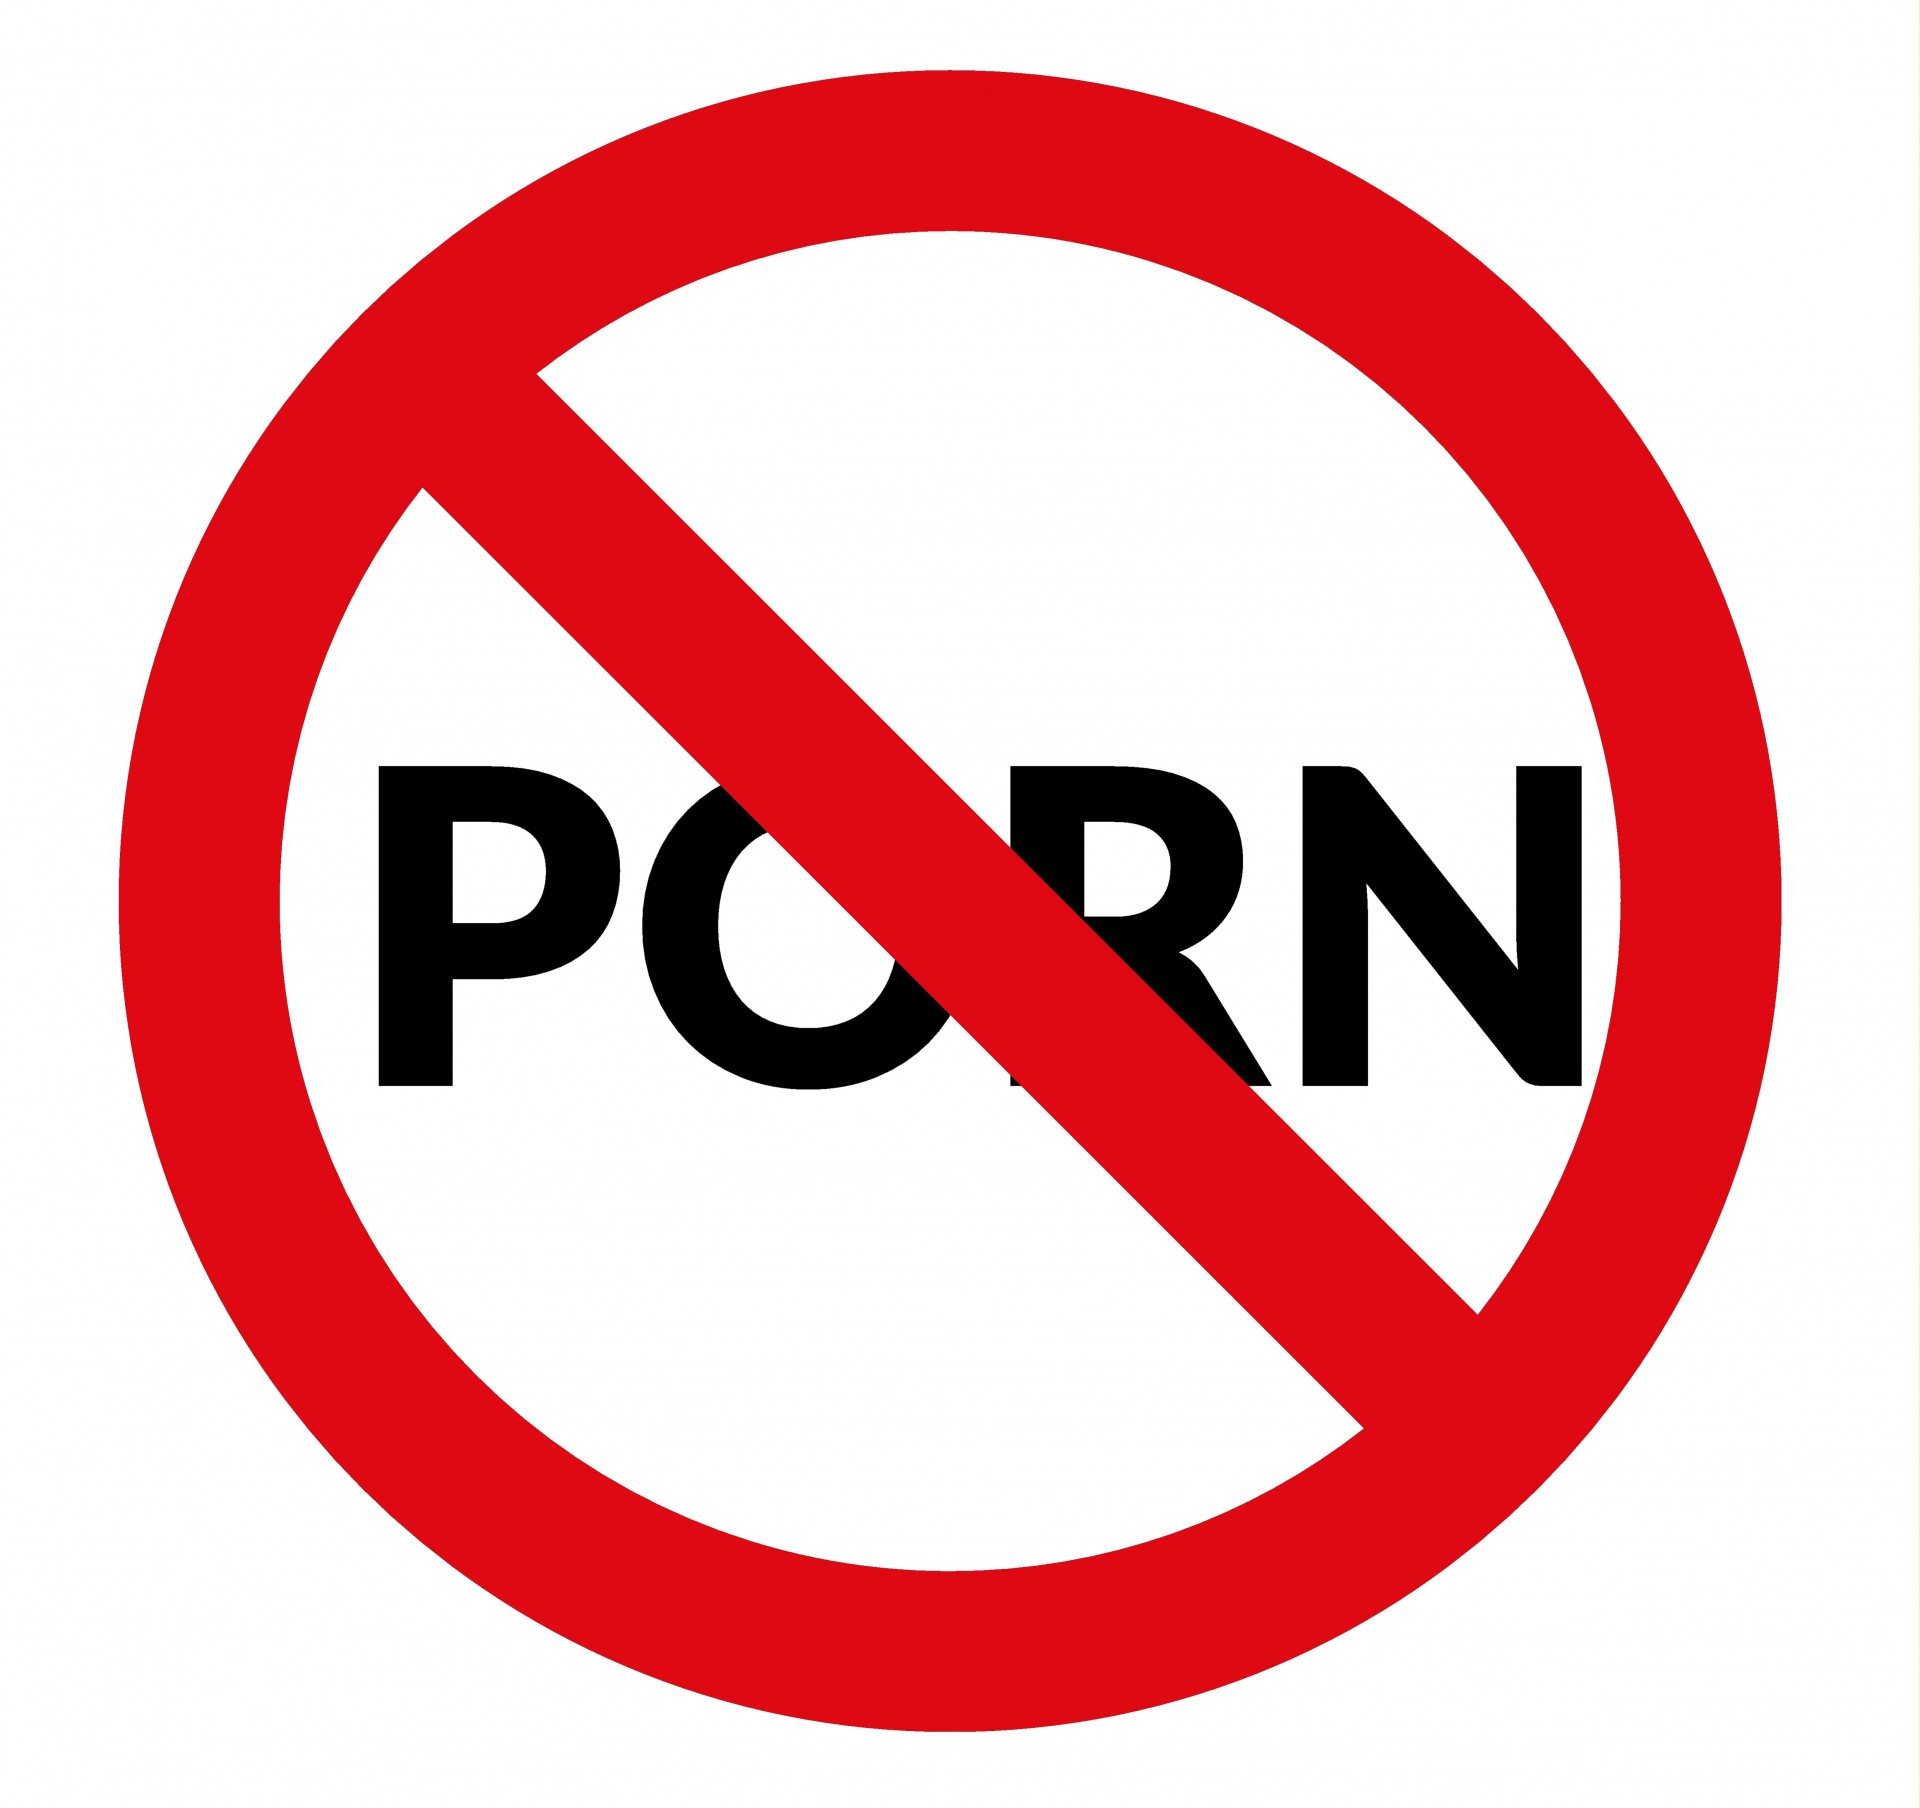 Porn,xxx,warning,sign,red - free image from needpix.com